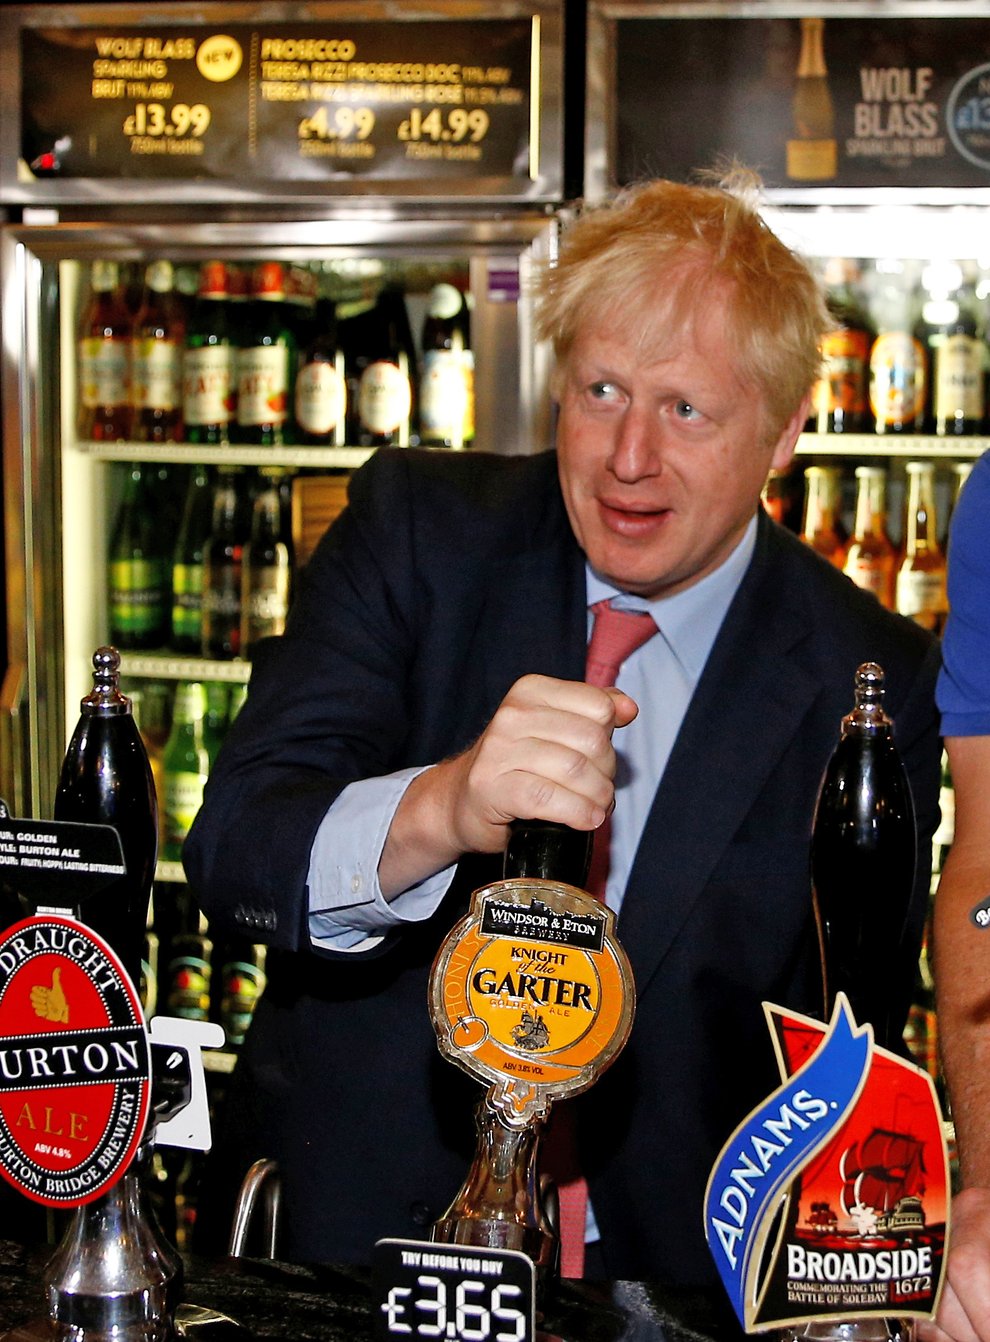 Tim Martin pulls a pint alongside Boris Johnson at a London Wetherspoon  pub last year. Now Martin has closed his pubs following the PM's direction (PA Images)